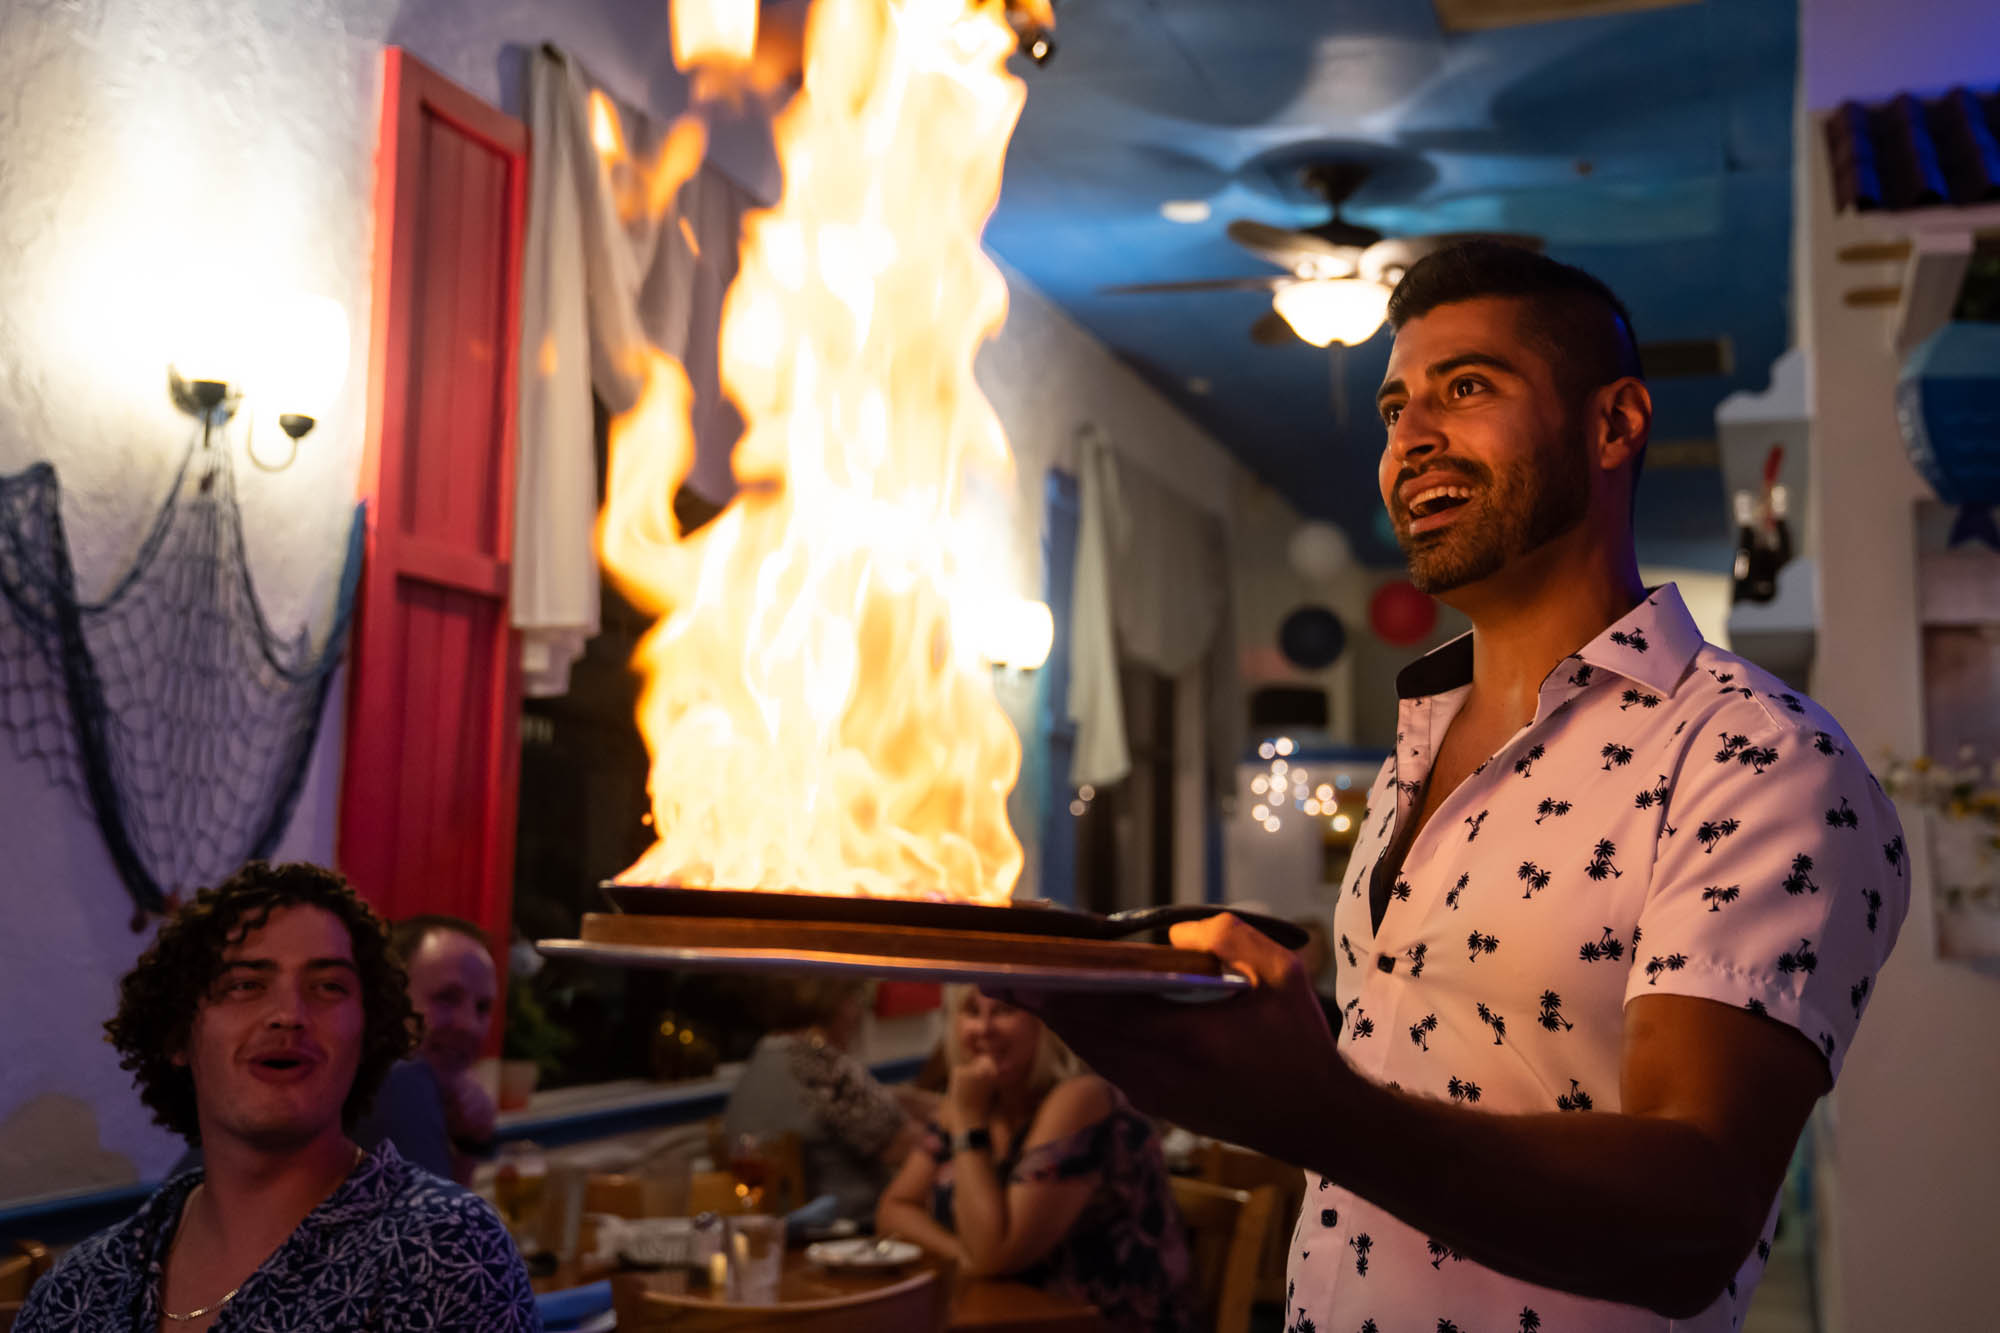 A server holding a plate with a flaming dish in front of amused guests